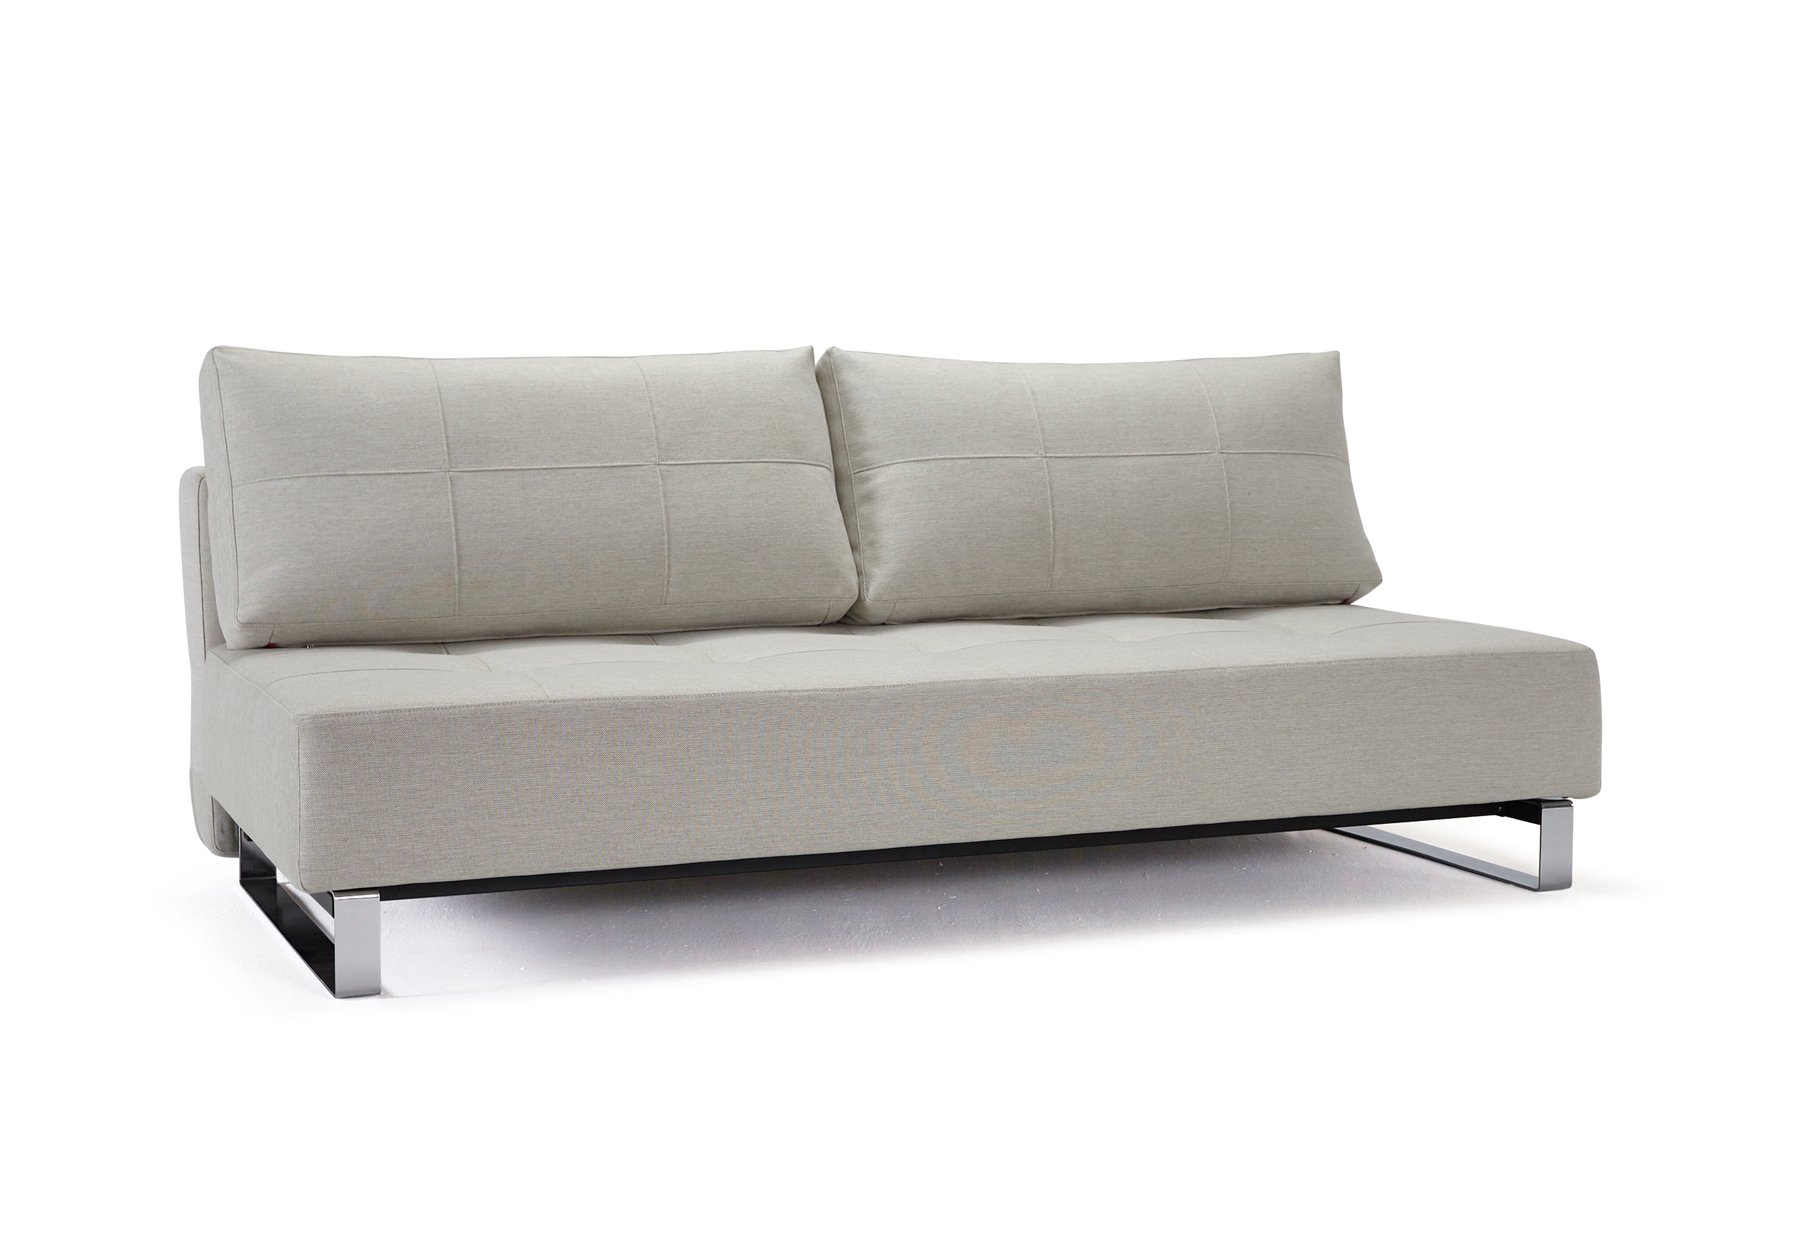 supremax deluxe excess lounger sofa bed